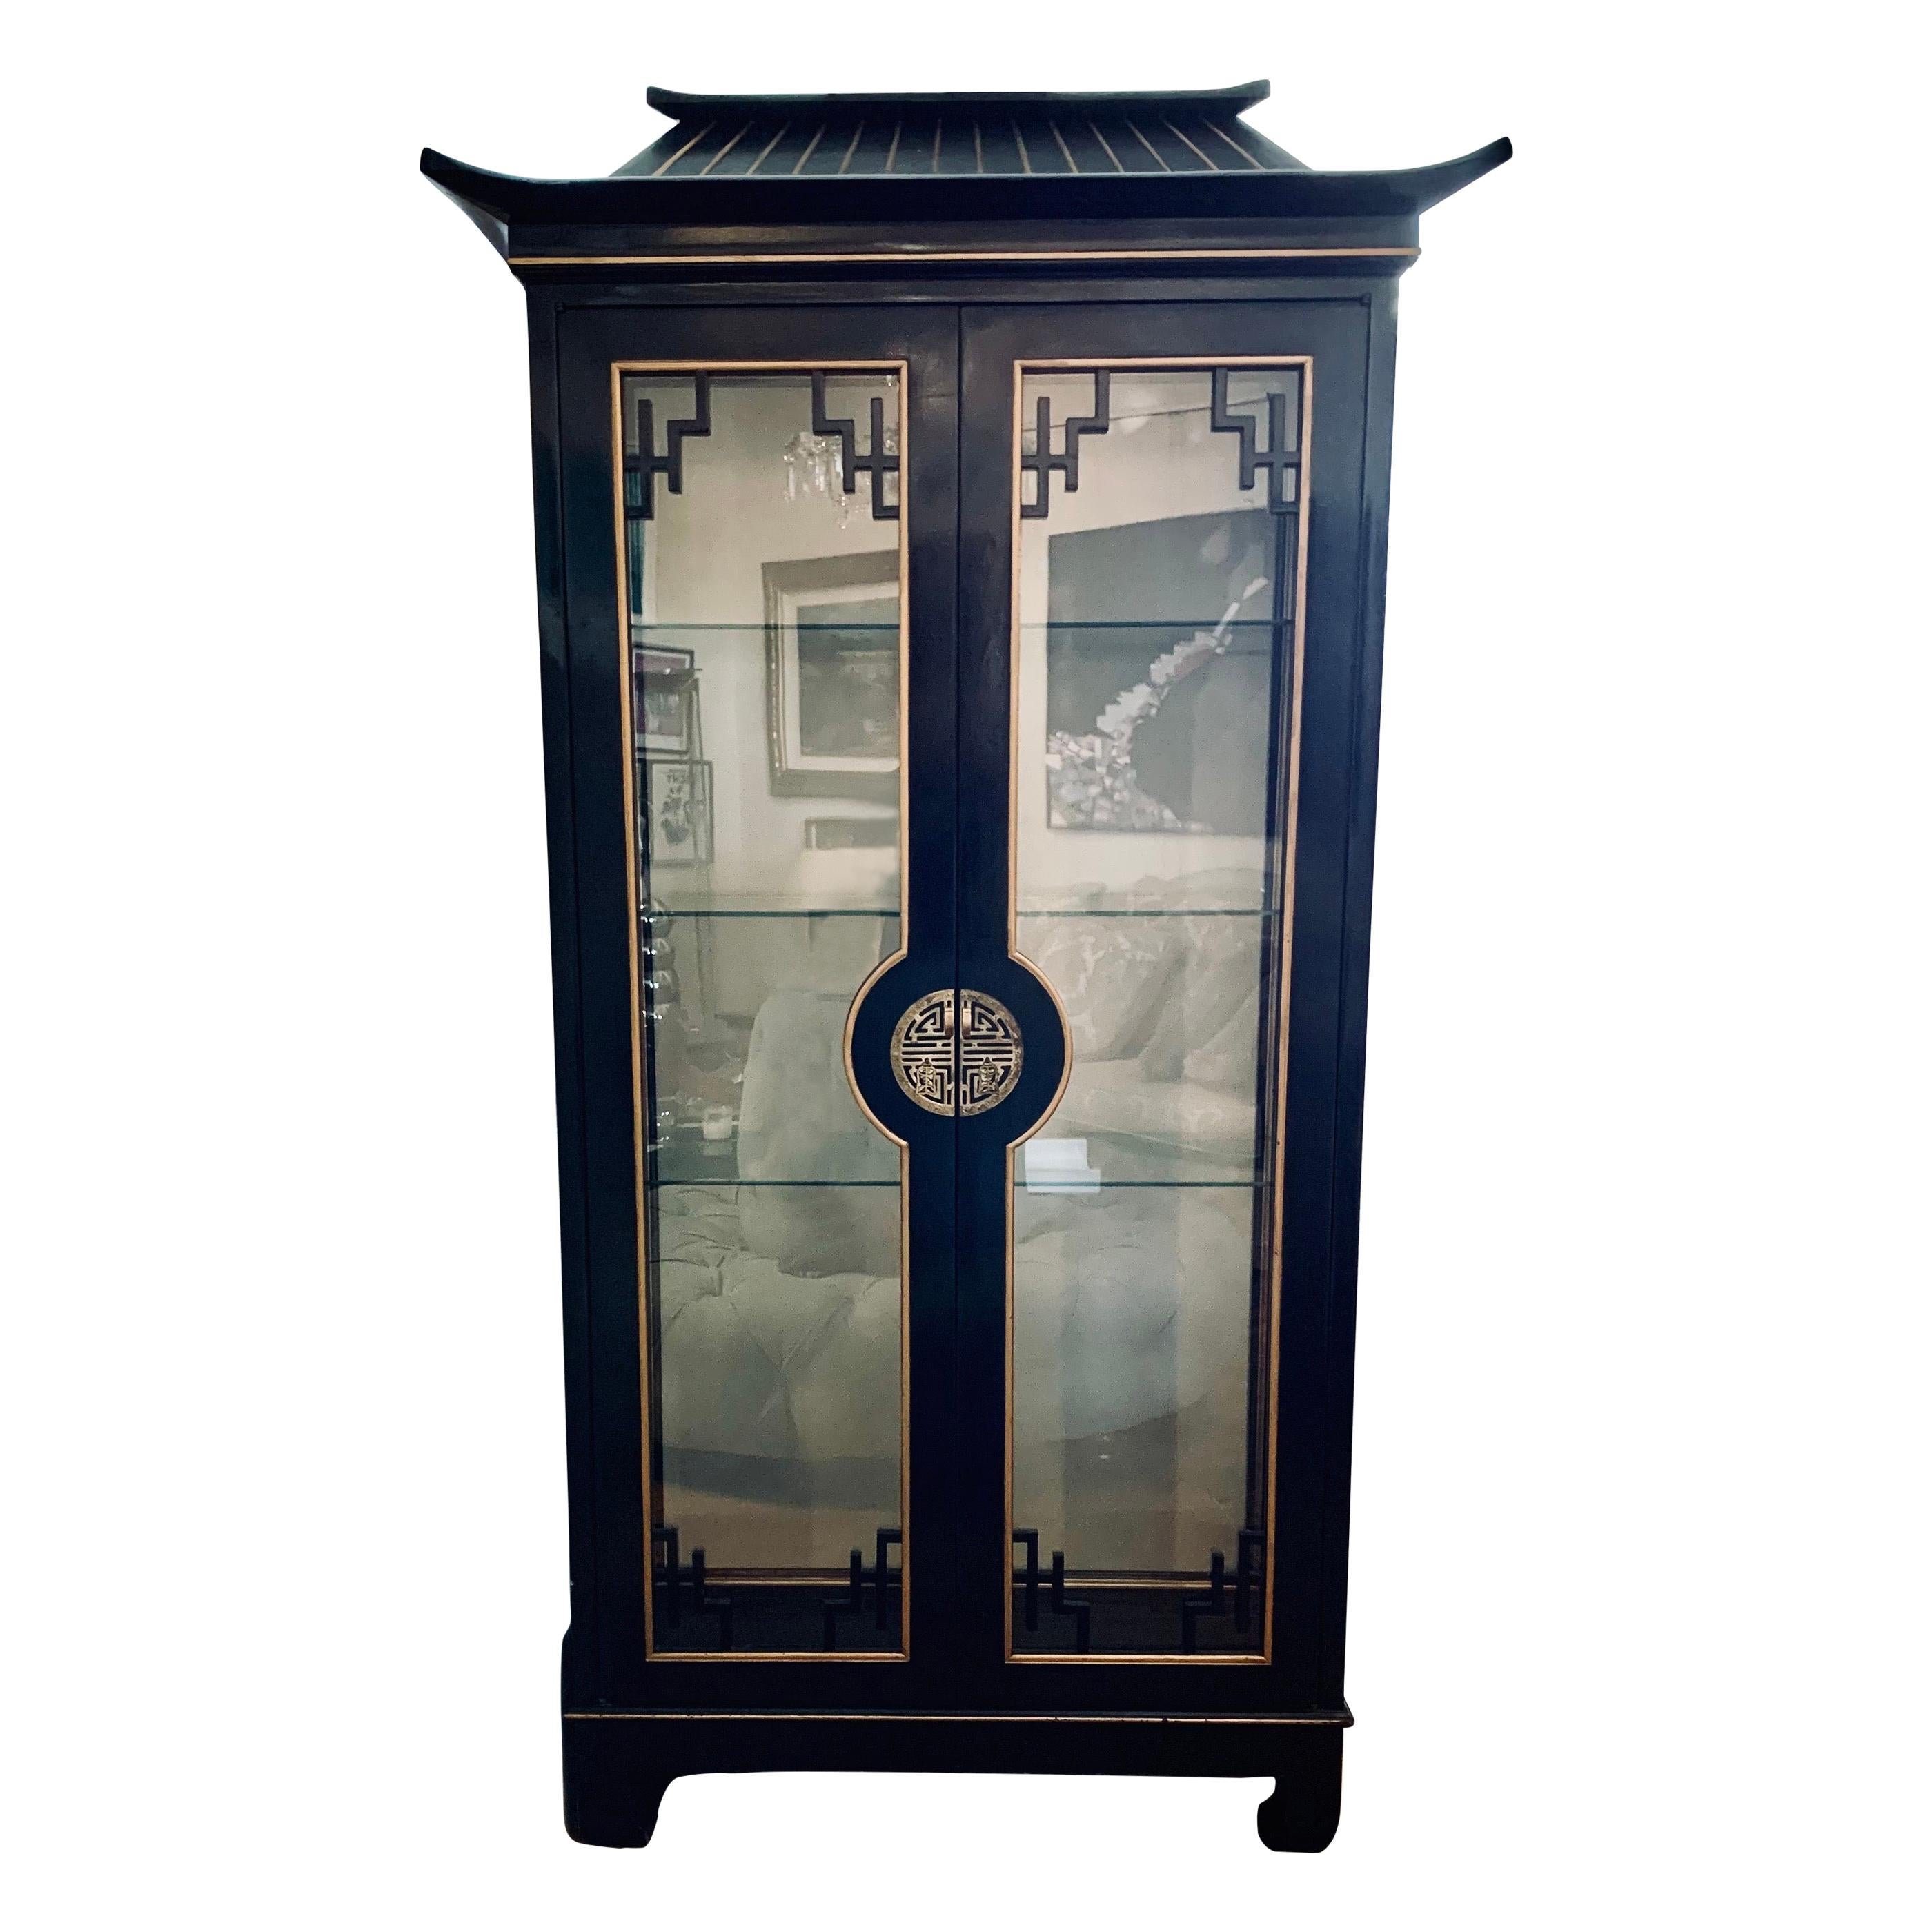 Chinoiserie Asian Black Lacquer Pagoda Style Display China Cabinet Vitrine